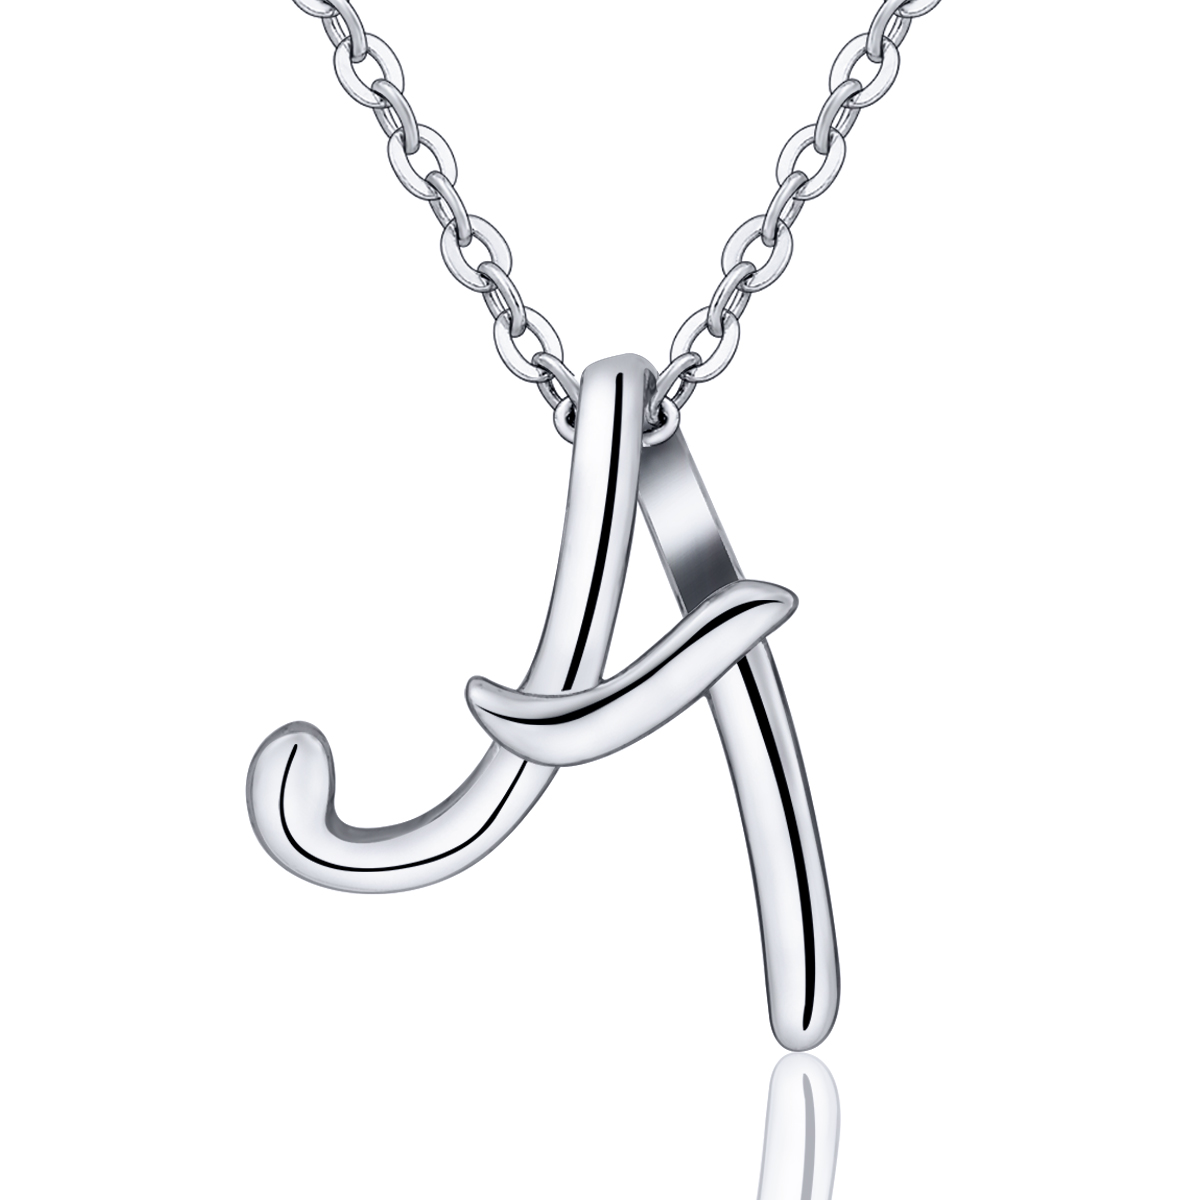 Fashion Jewelry Letter A Shape 925 Sterling Sliver Rhodium Plated Necklace Pendants